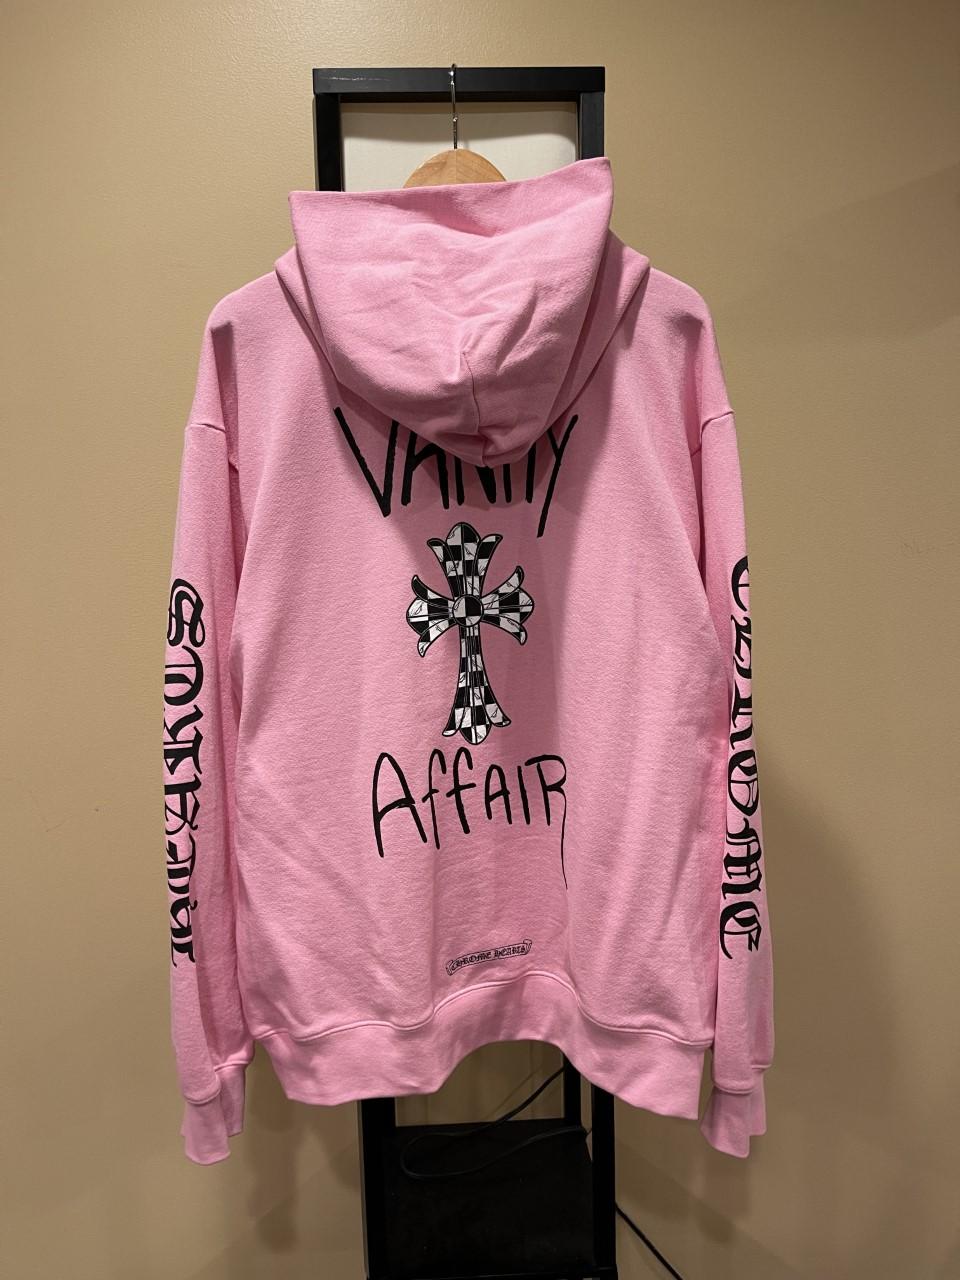 Chrome Hearts
Matty Boy Vanity Affair Pink Pullover Hoodie
Size XL (could fit large as well)
Excellent condition

Note: very small mark on the back of the hoodie (see pic with the penny). Not noticeable during wear. Could easily come out with a dry